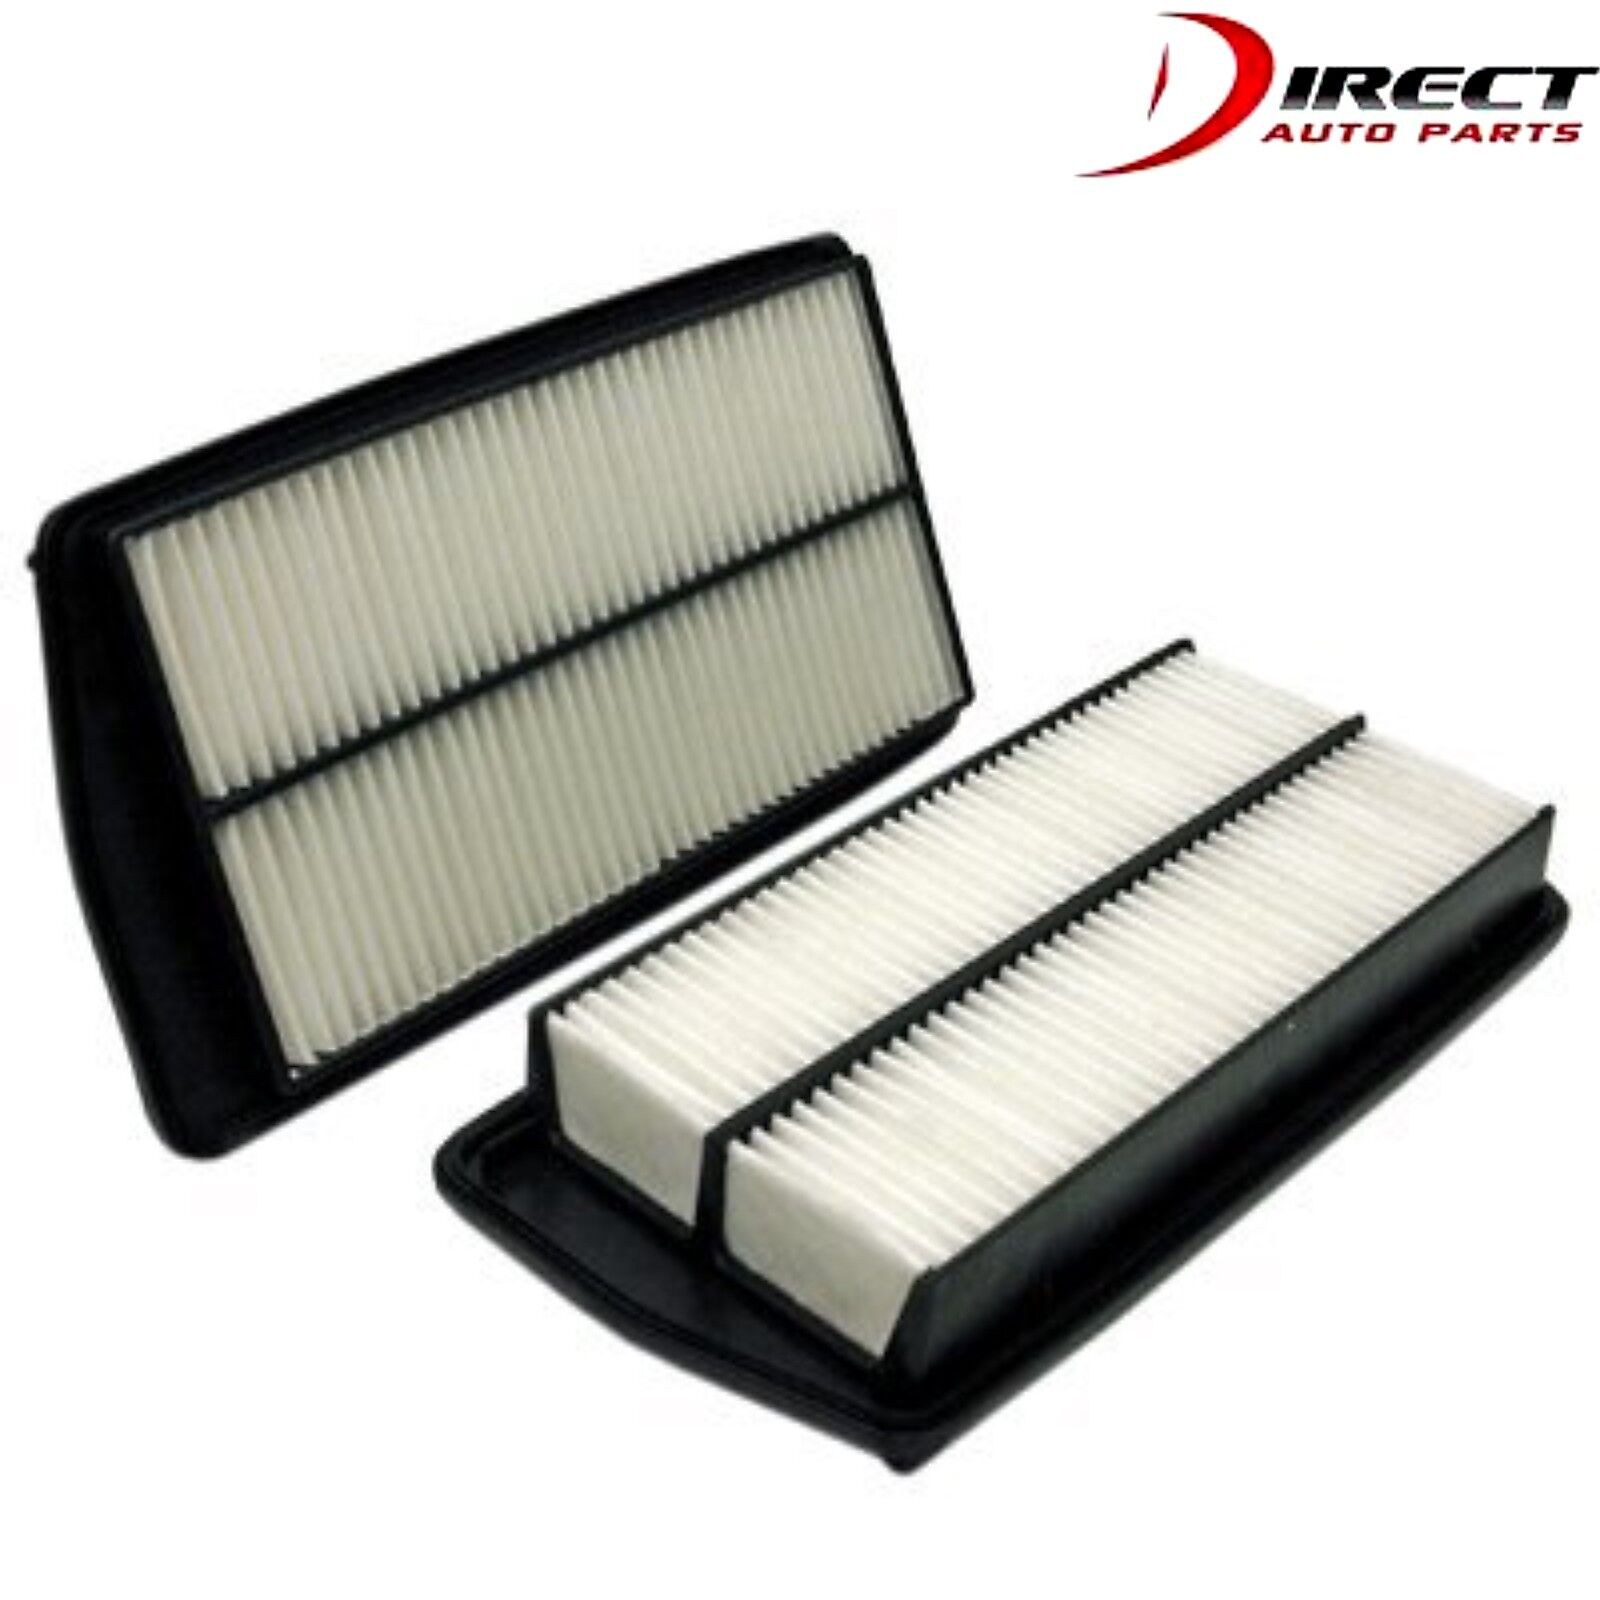 AIR FILTER For ACURA RDX OEM 17220-RWC-A01 2012 -2007 2.3L Engine